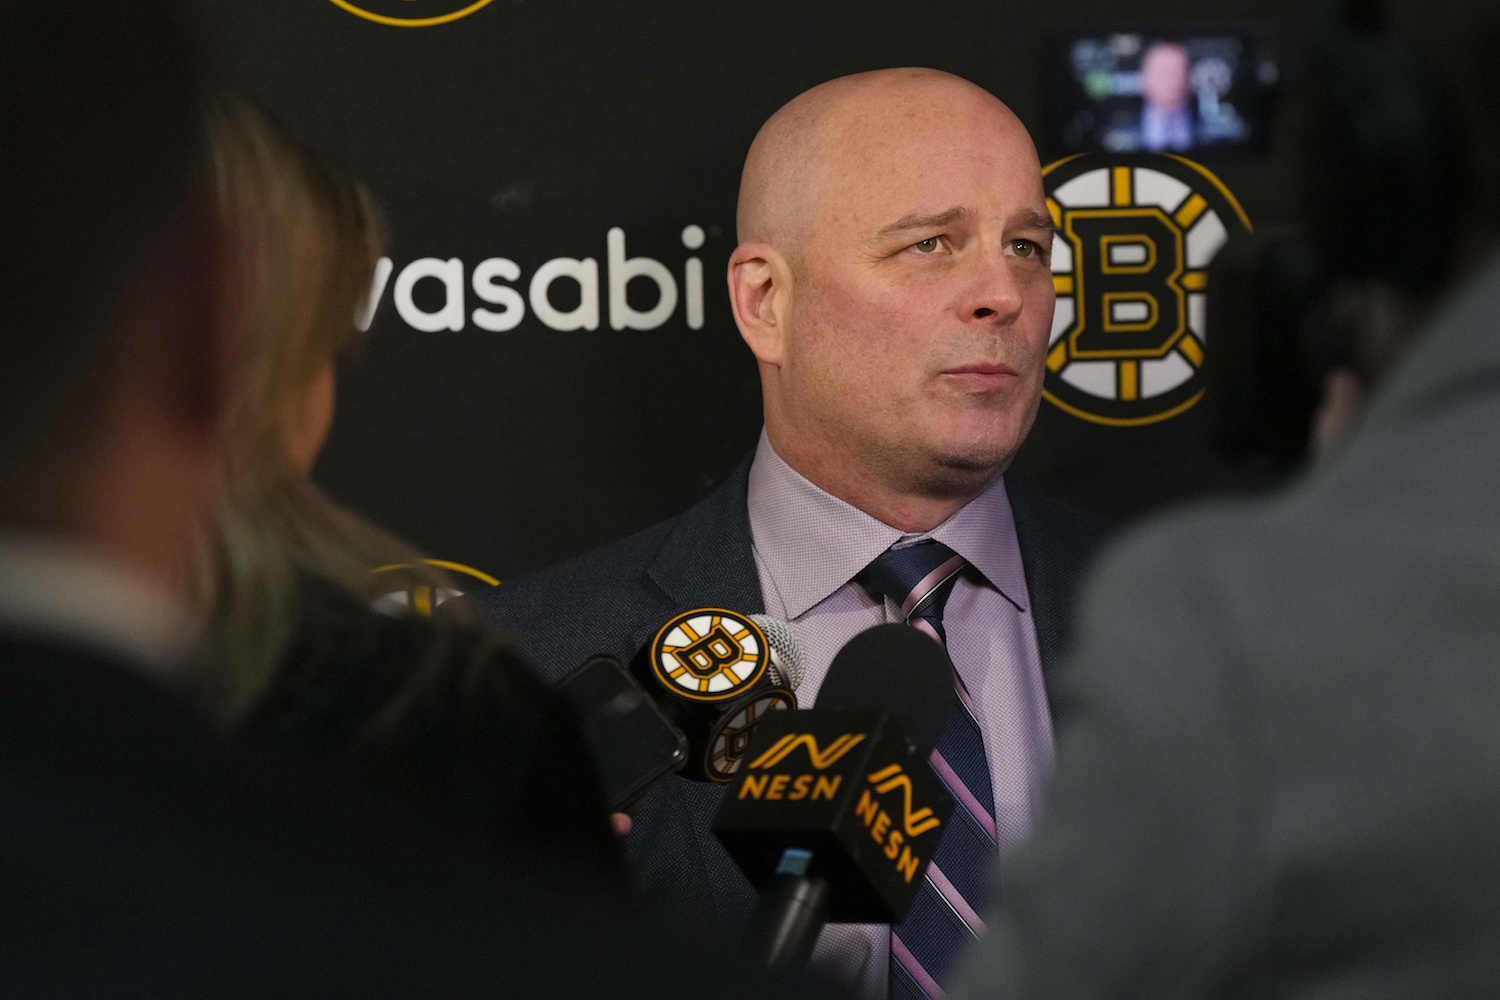 Jan 29, 2023; Raleigh, North Carolina, USA; Boston Bruins head coach Jim Montgomery talks to the press after the game against the Carolina Hurricanes at PNC Arena. Mandatory Credit: James Guillory/USA TODAY Sports